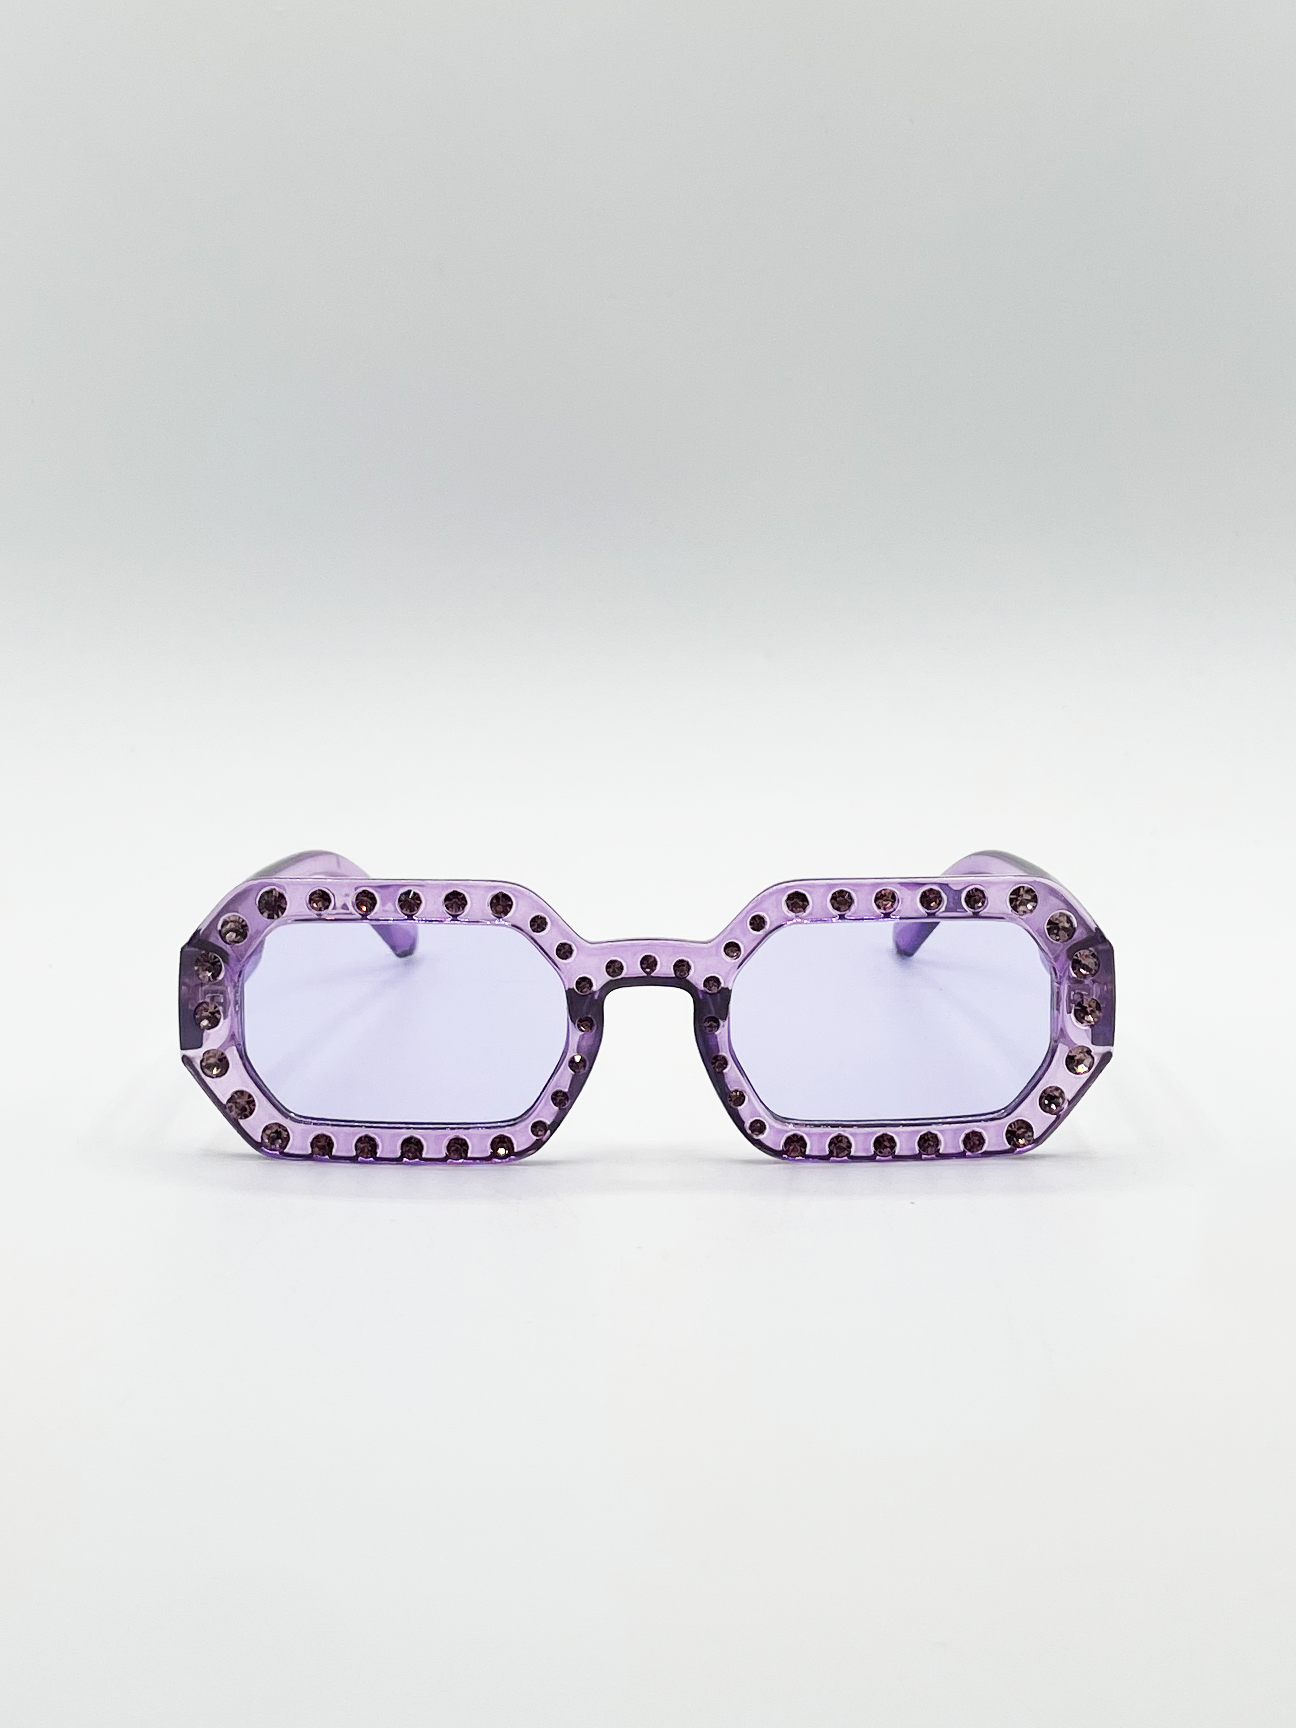 Oval Festival Glasses with Gem Detail in Purple